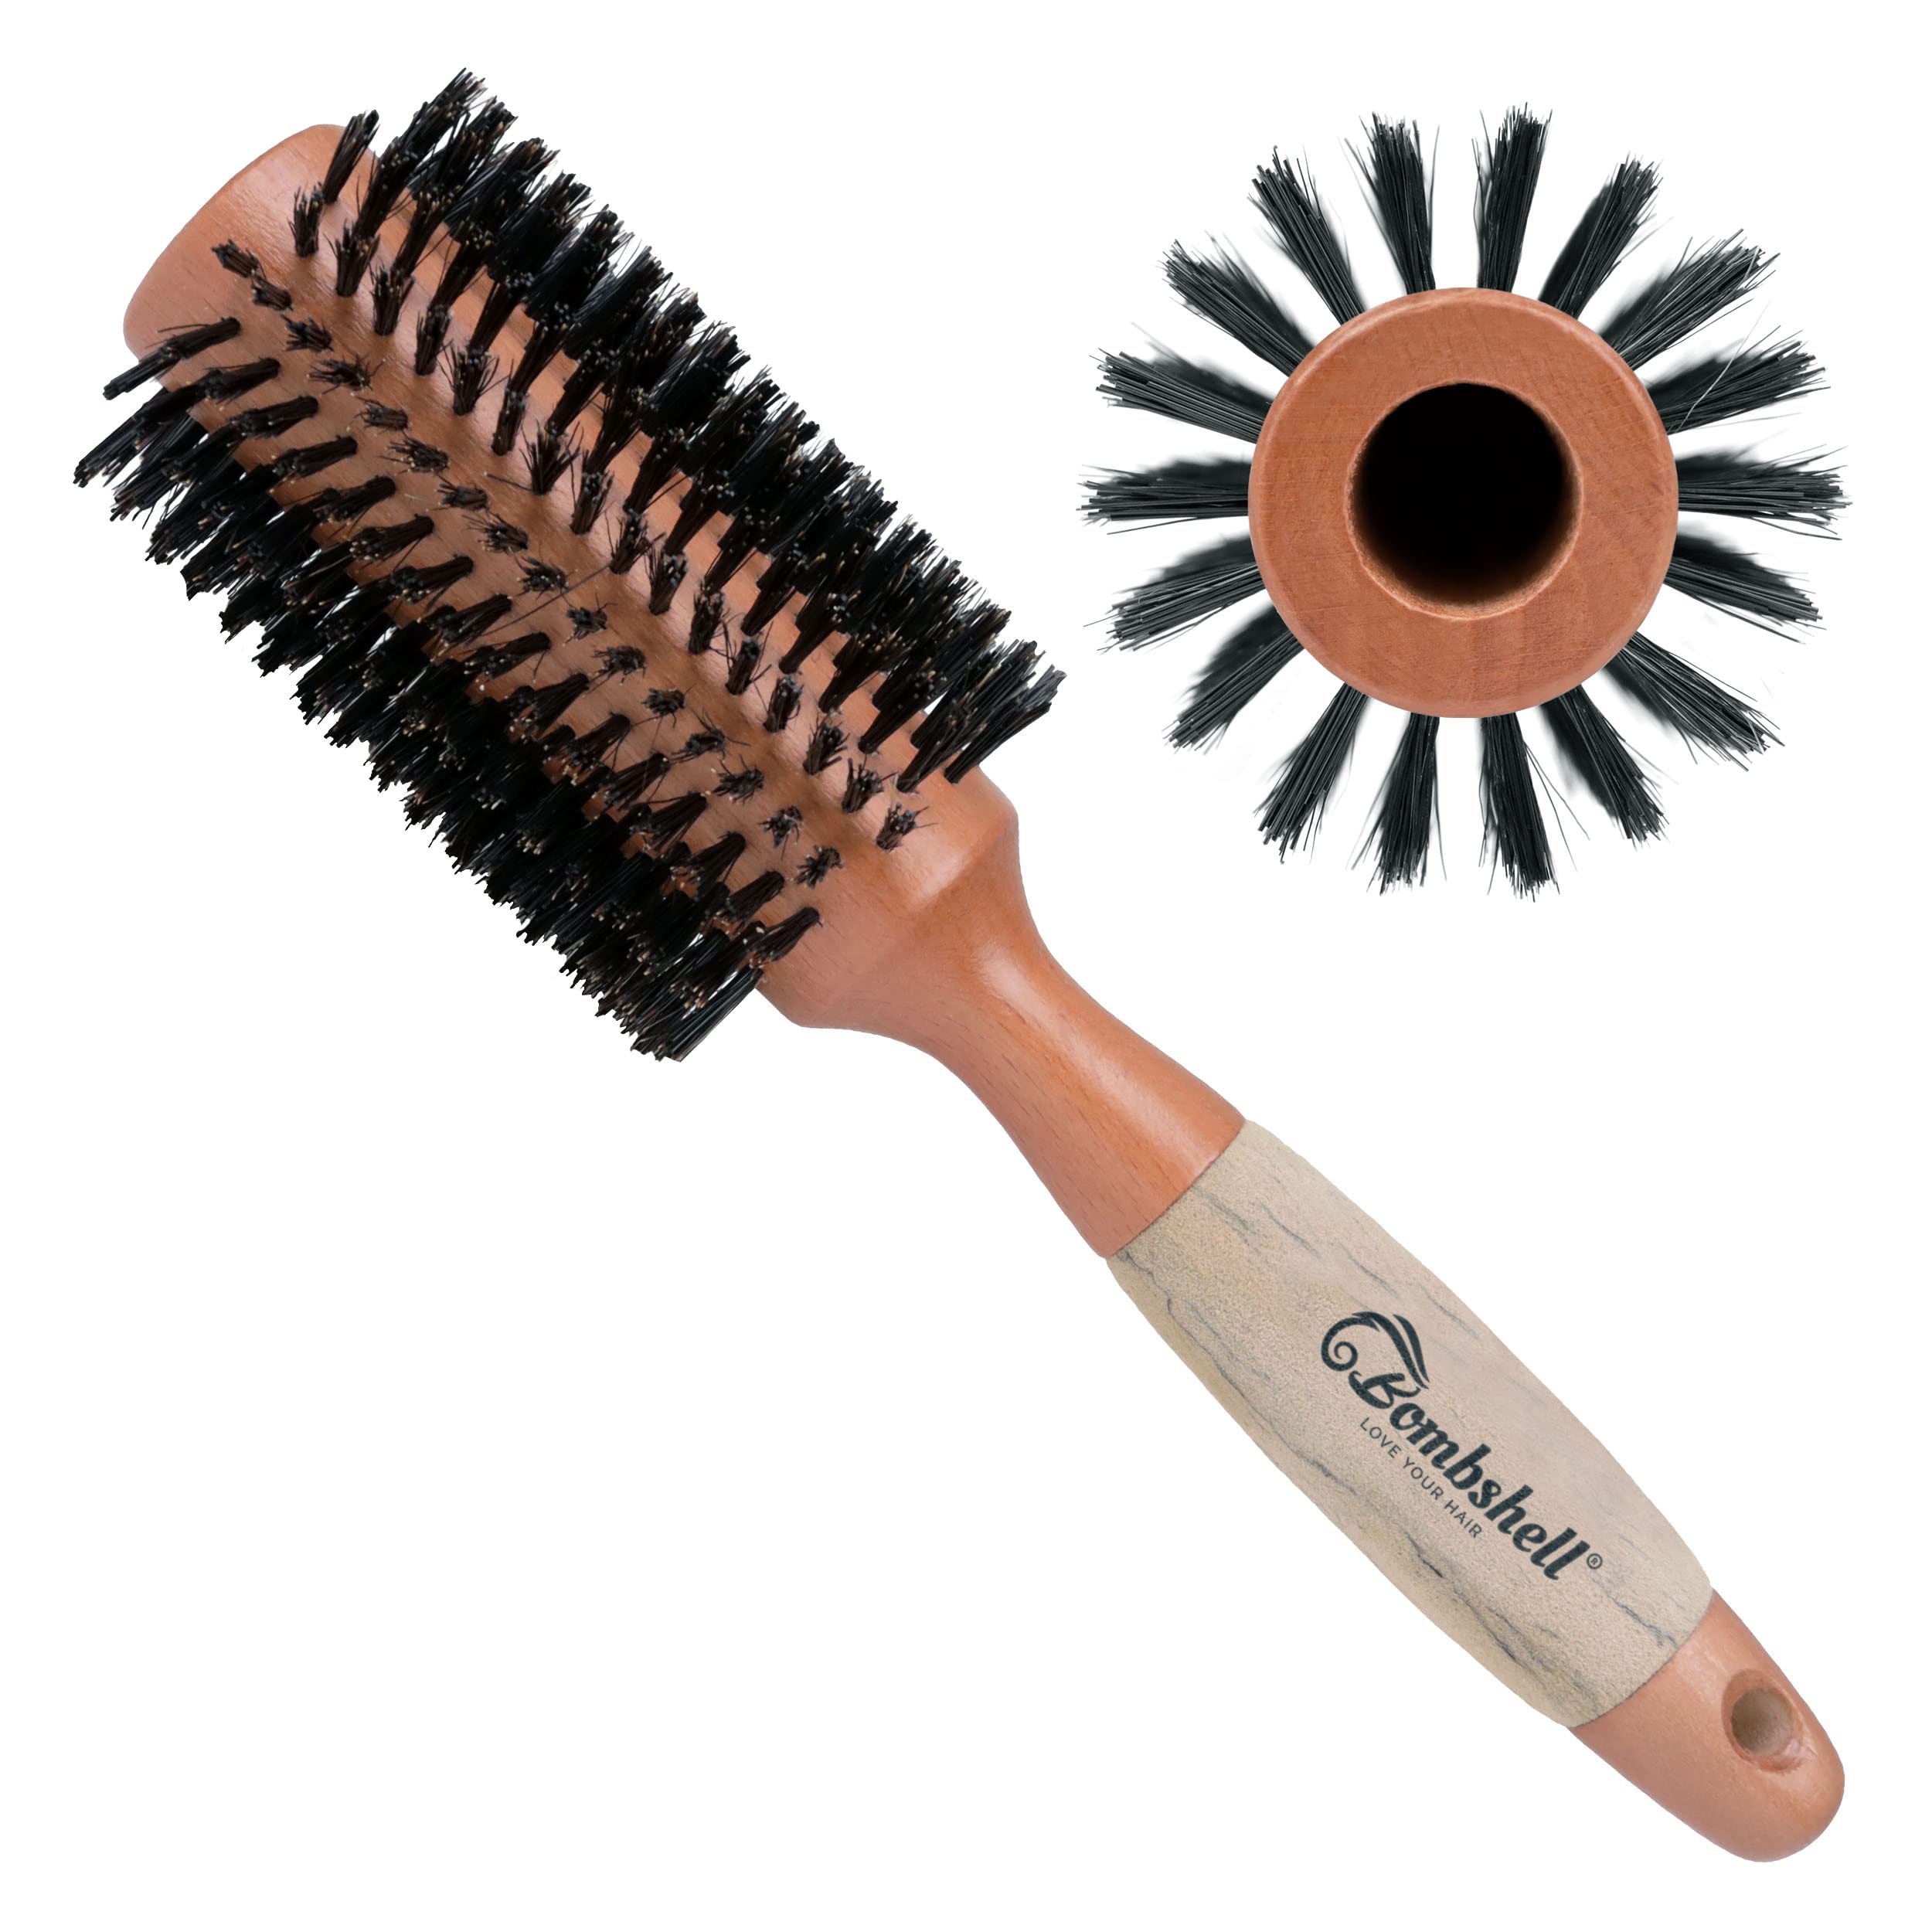 Handle, Styling, and Wood Natural Wood Round Brush for inch) Blow — (2.5 with Out, Curling Bristle Round Brush Sustainable Birch Hair Bombshell Boar Round Birch Brush